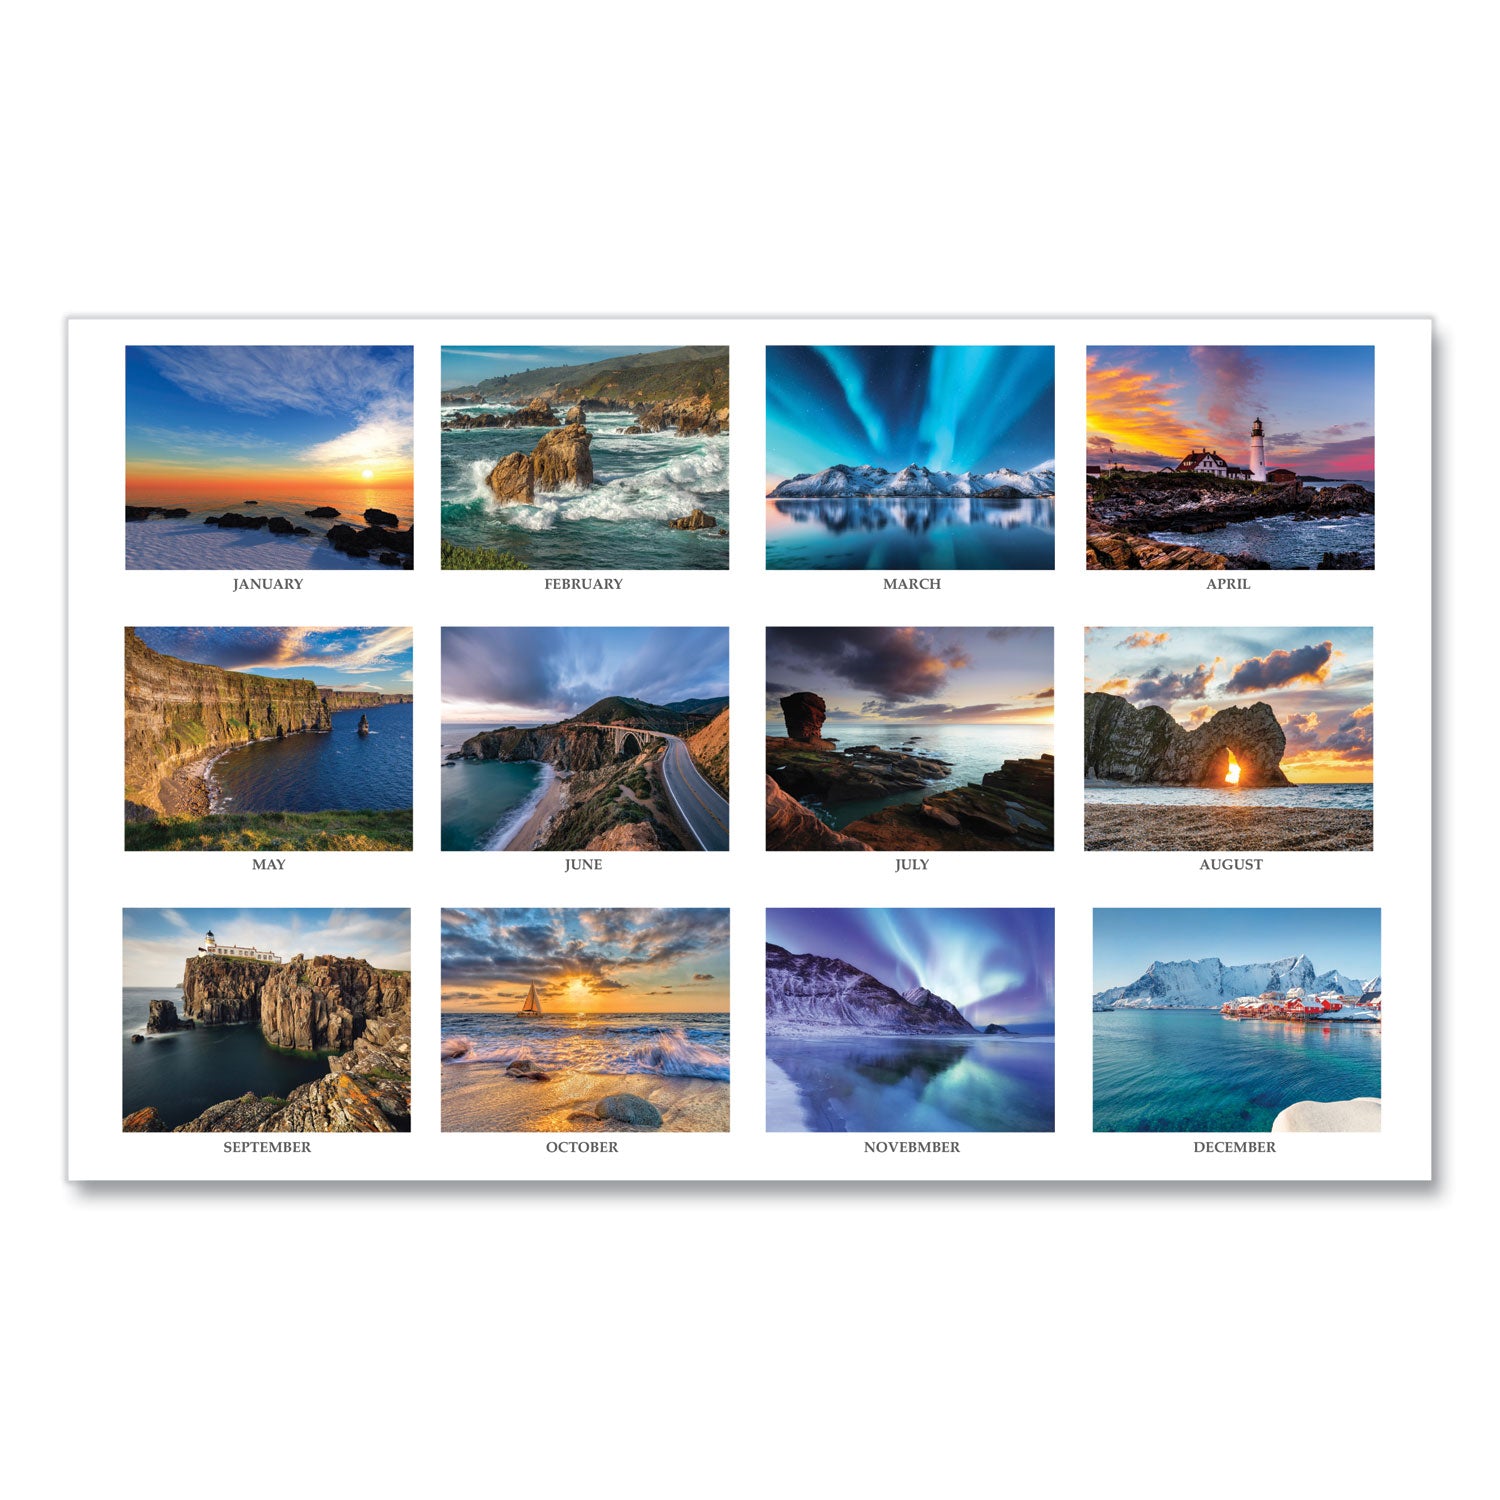 recycled-earthscapes-desk-pad-calendar-seascapes-photography-22-x-17-black-binding-corners12-month-jan-to-dec-2024_hod138 - 3